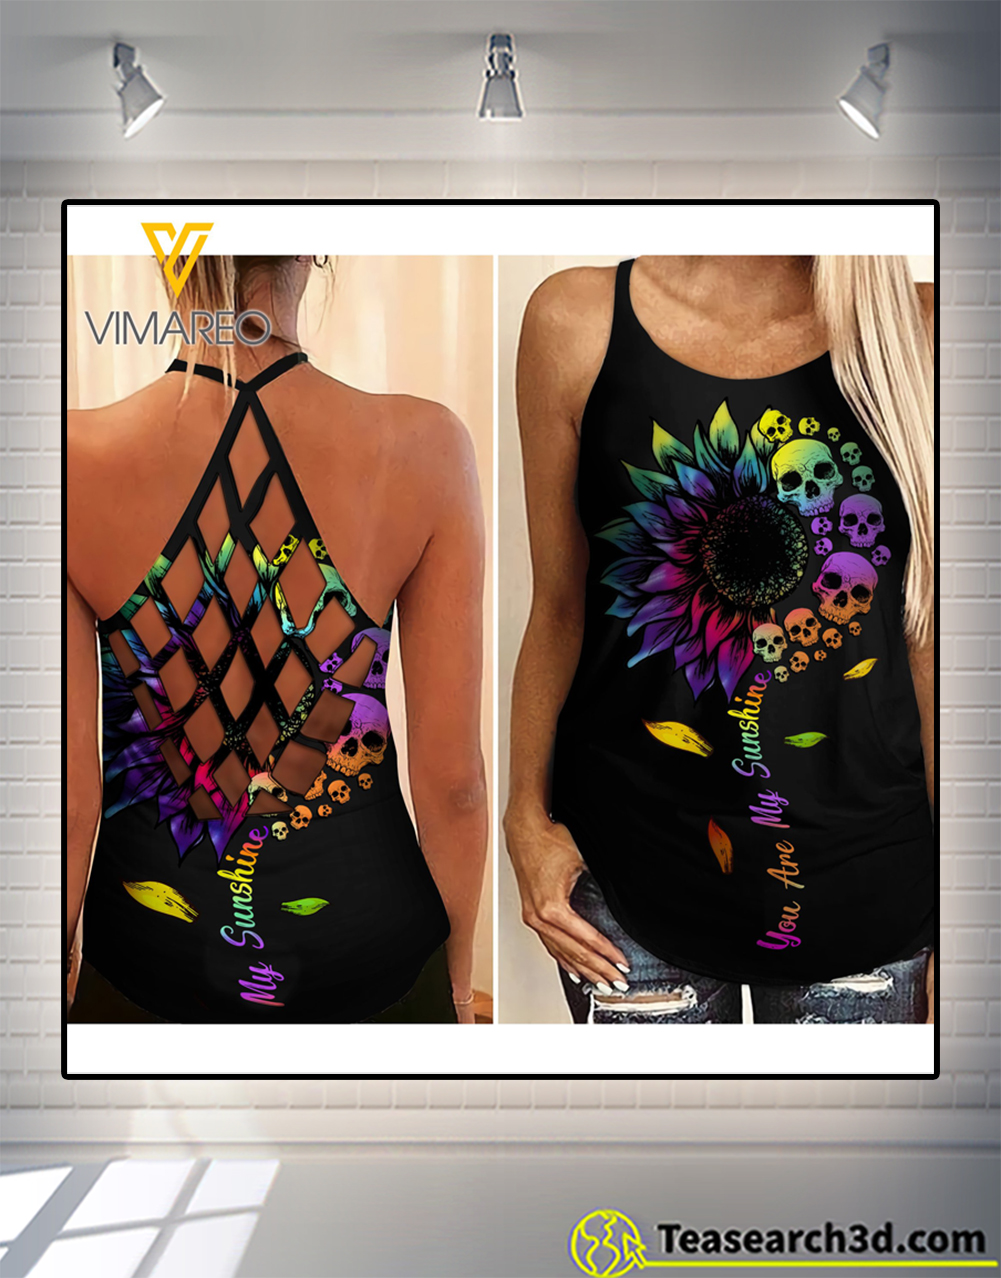 You are my sunshine criss cross open back camisole tank top